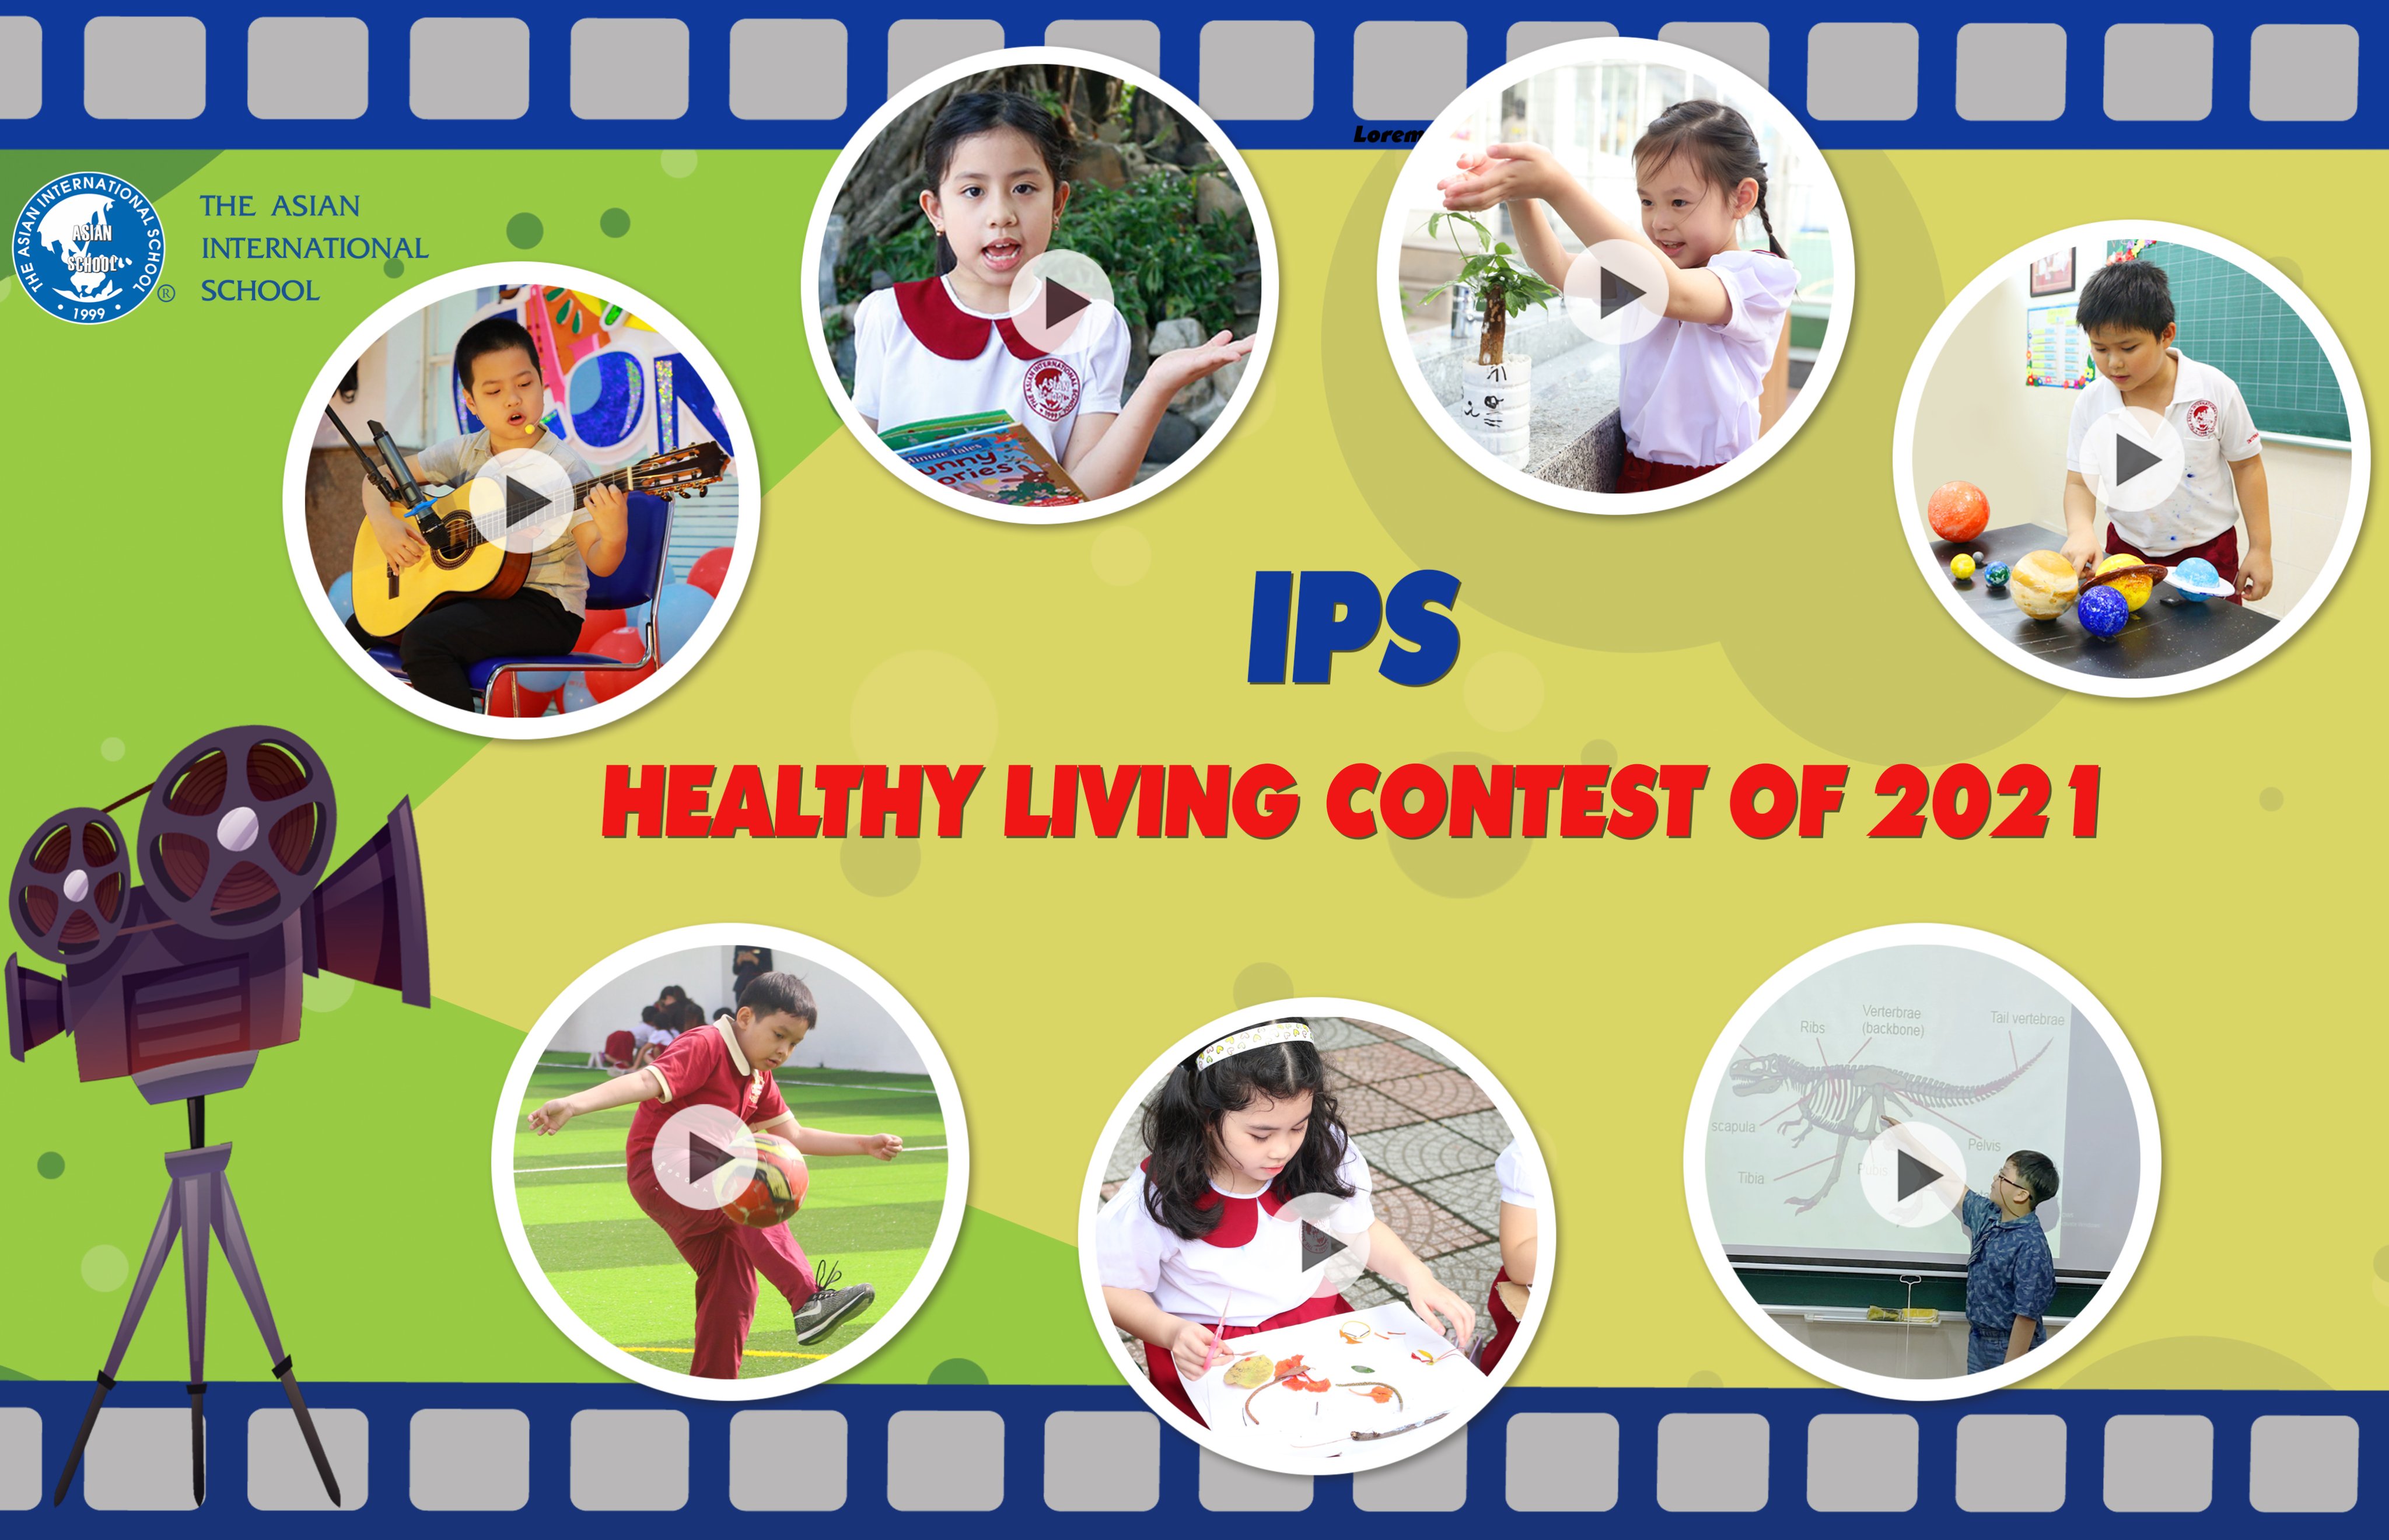 CUỘC THI "IPS HEALTHY LIVING CONTEST OF 2021"<img src='/App_Themes/Default/Images/iconnew.gif' alt='' />